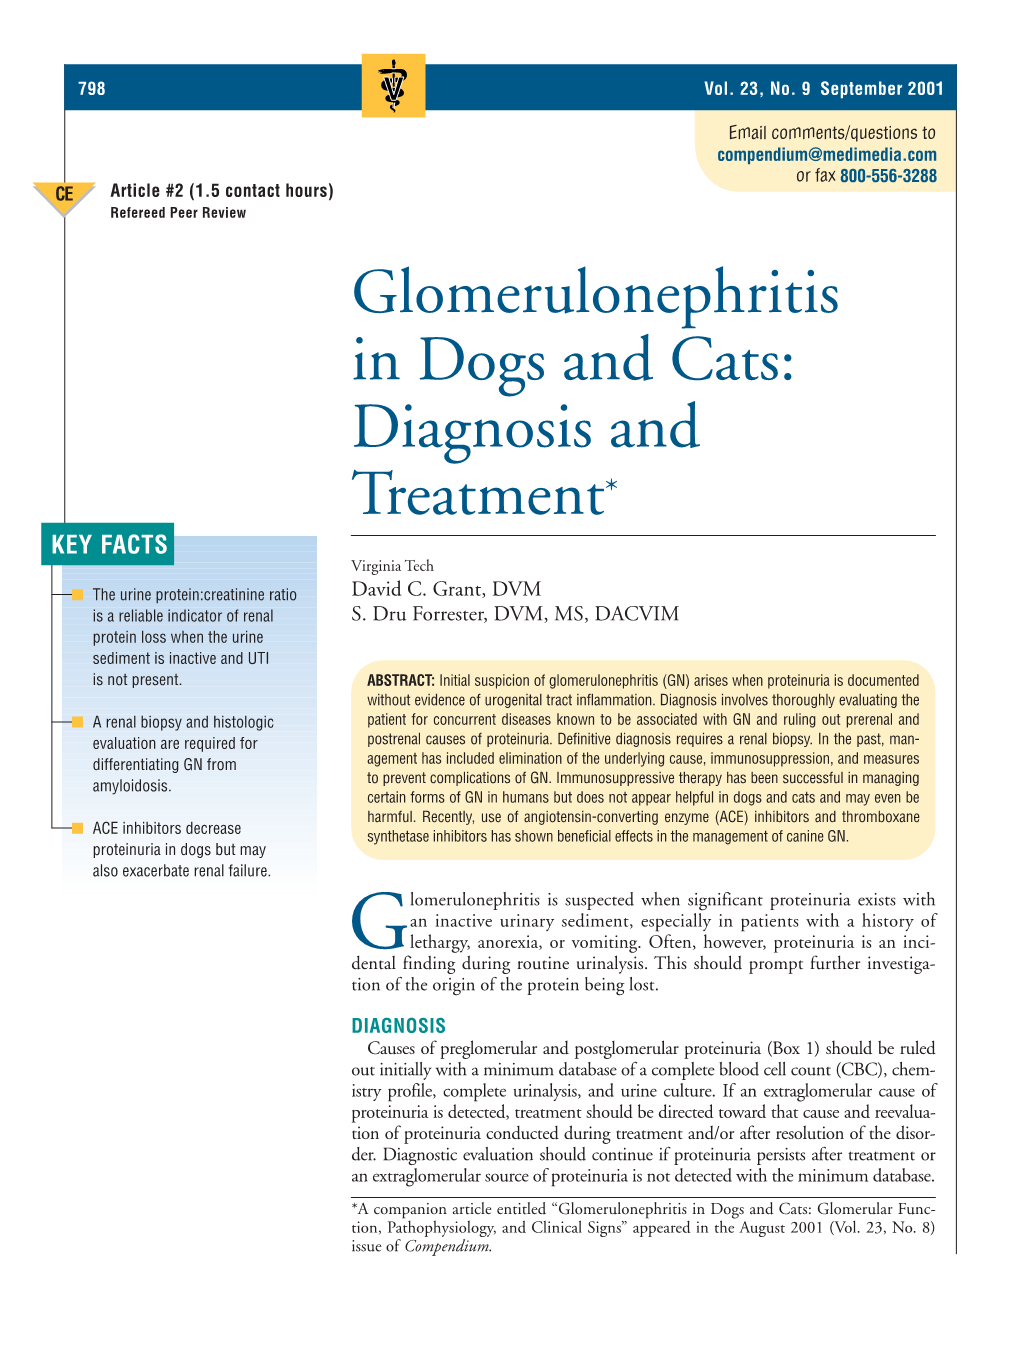 Glomerulonephritis in Dogs and Cats: Diagnosis and Treatment* KEY FACTS Virginia Tech I the Urine Protein:Creatinine Ratio David C